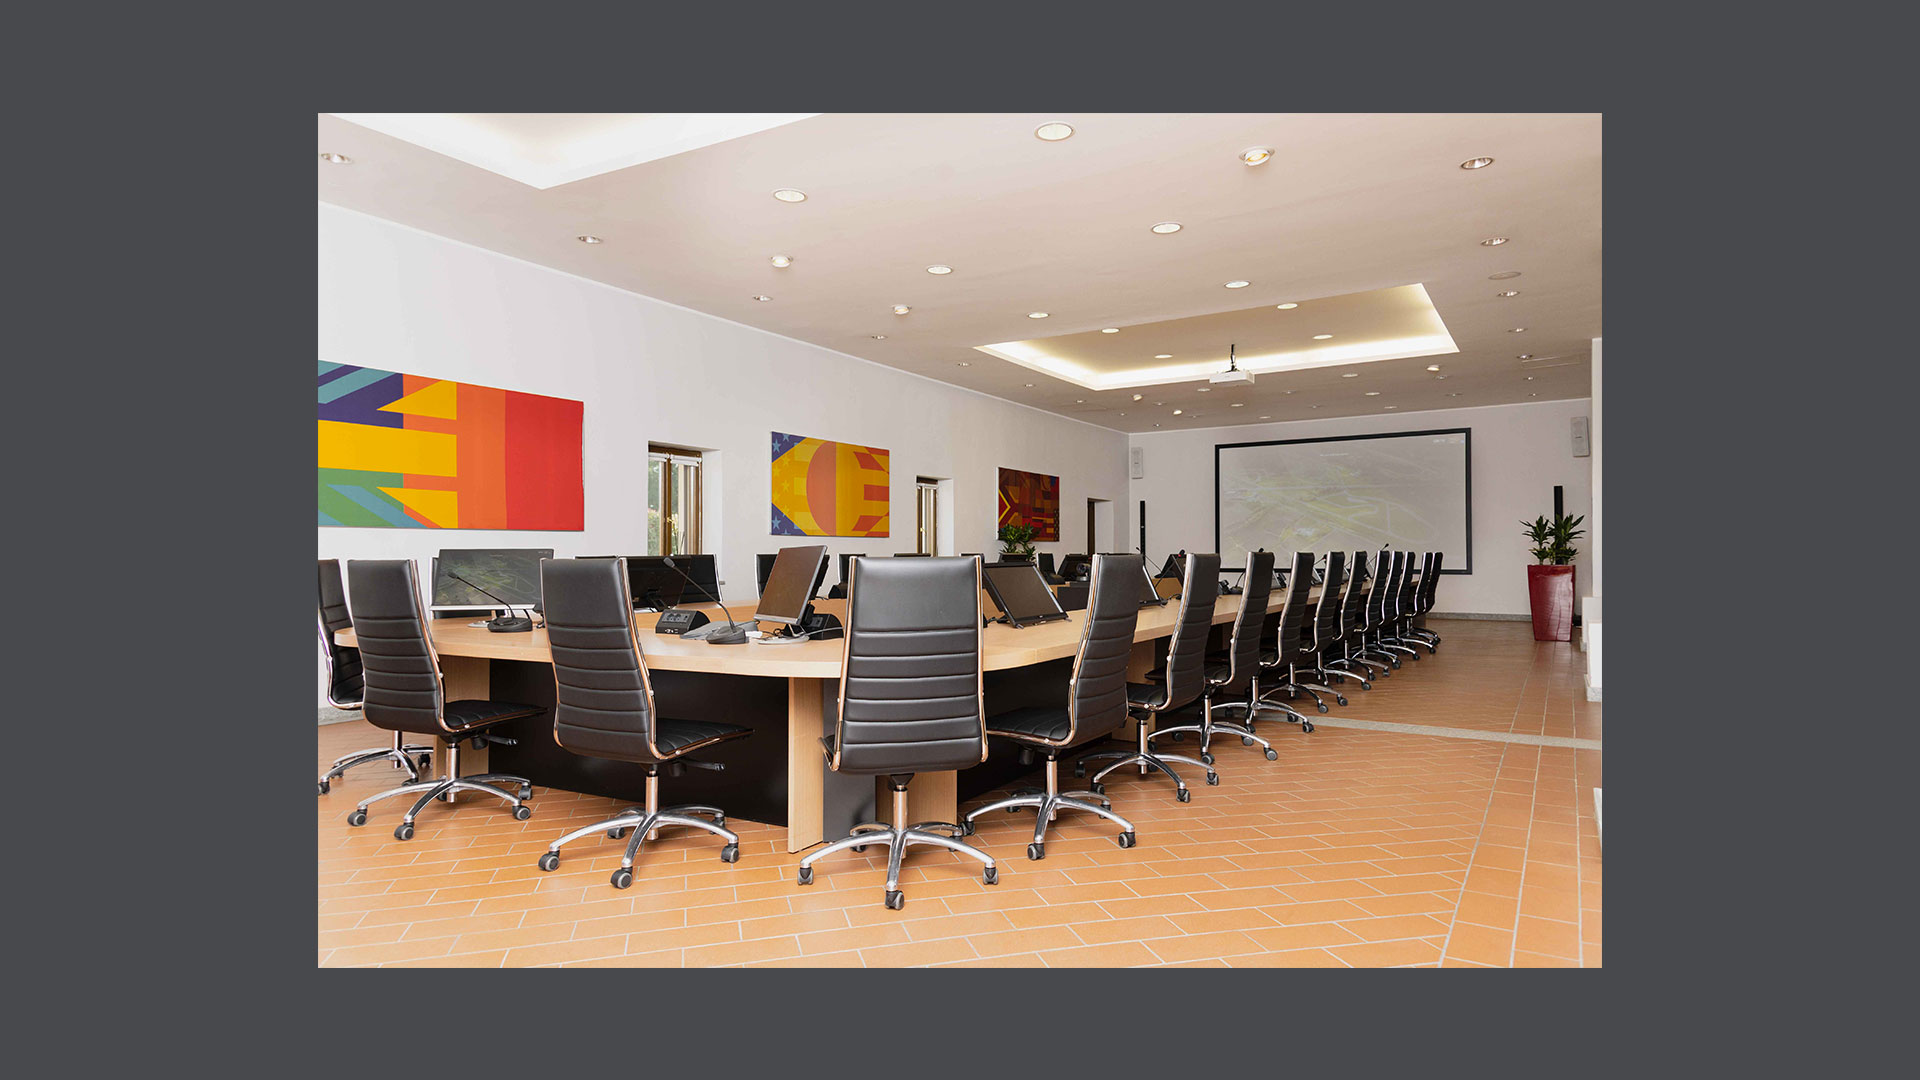 Photos of the 35-seat GEC Room, furnished in a modern and elegant style